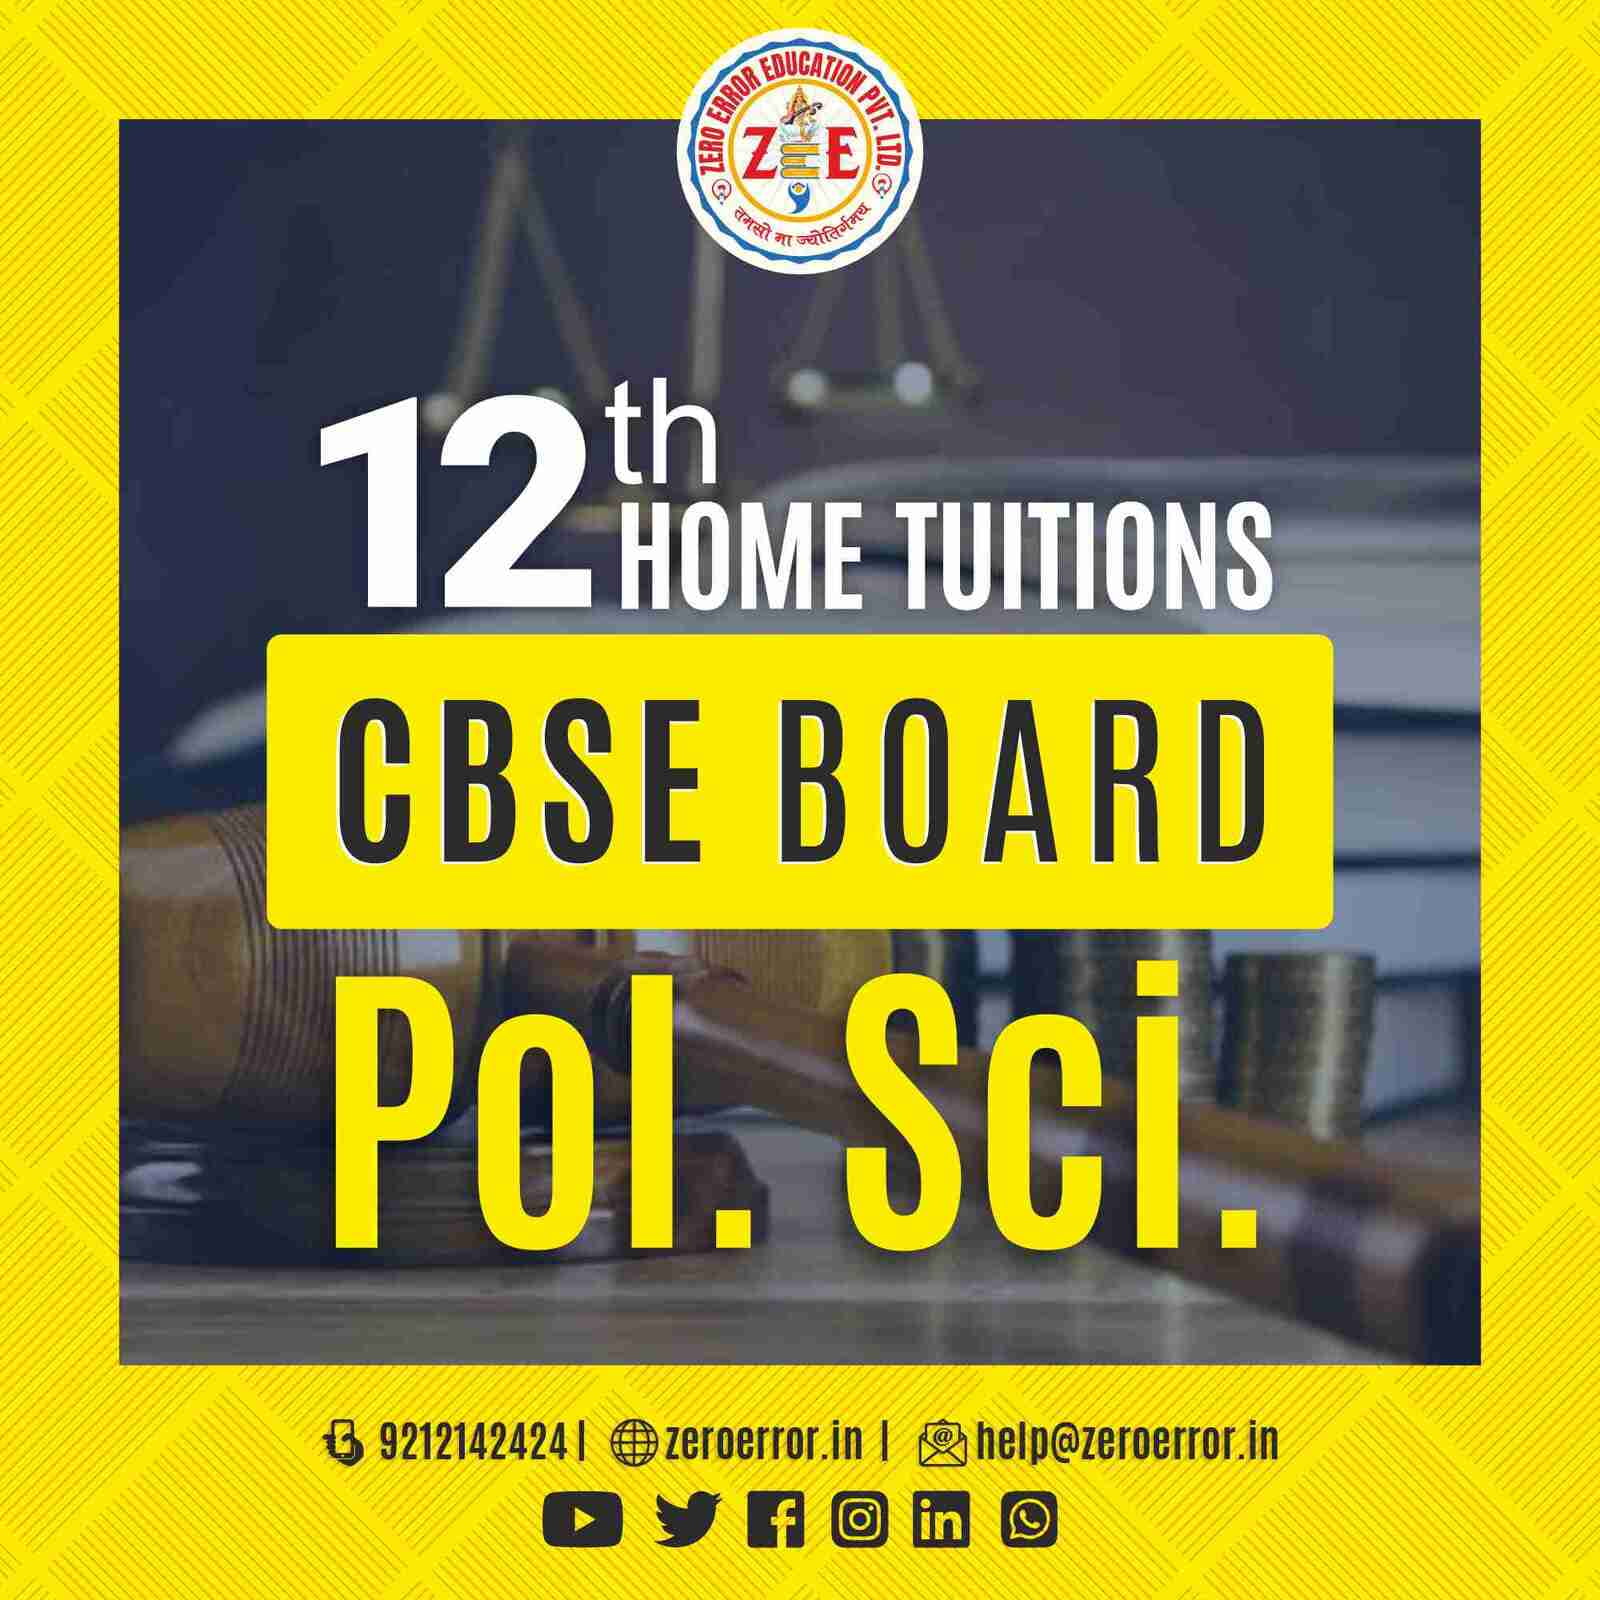 12th Grade CBSE Pol Sci Online Classes by Zero Error Education Prepare for your CBSE board exams with online and offline Pol Sci classes for 12th grade. Learn from experienced home tutors and get all the help you need to succeed. Enroll today at Zero Error Education. [https://zeroerror.in/] Call 9212142424 for more information.